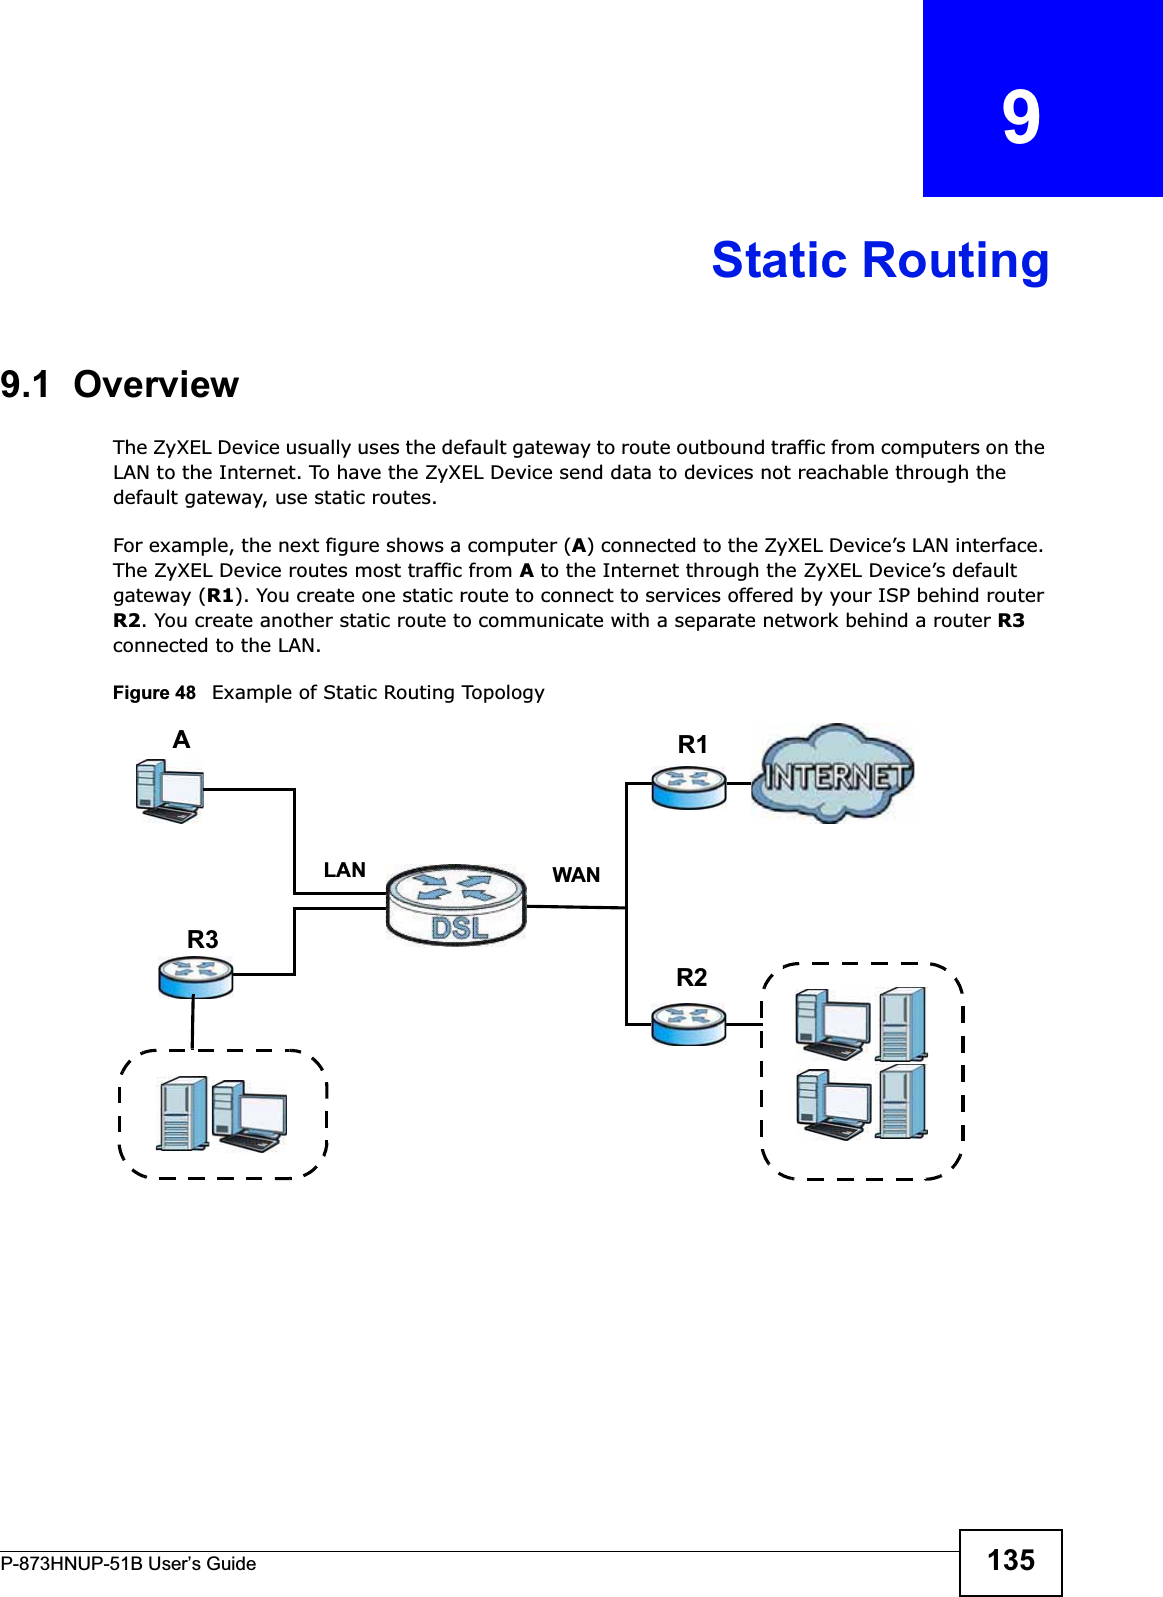 P-873HNUP-51B User’s Guide 135CHAPTER   9Static Routing9.1  Overview The ZyXEL Device usually uses the default gateway to route outbound traffic from computers on the LAN to the Internet. To have the ZyXEL Device send data to devices not reachable through the default gateway, use static routes.For example, the next figure shows a computer (A) connected to the ZyXEL Device’s LAN interface. The ZyXEL Device routes most traffic from Ato the Internet through the ZyXEL Device’s default gateway (R1). You create one static route to connect to services offered by your ISP behind router R2. You create another static route to communicate with a separate network behind a router R3connected to the LAN.   Figure 48   Example of Static Routing TopologyWANR1R2AR3LAN